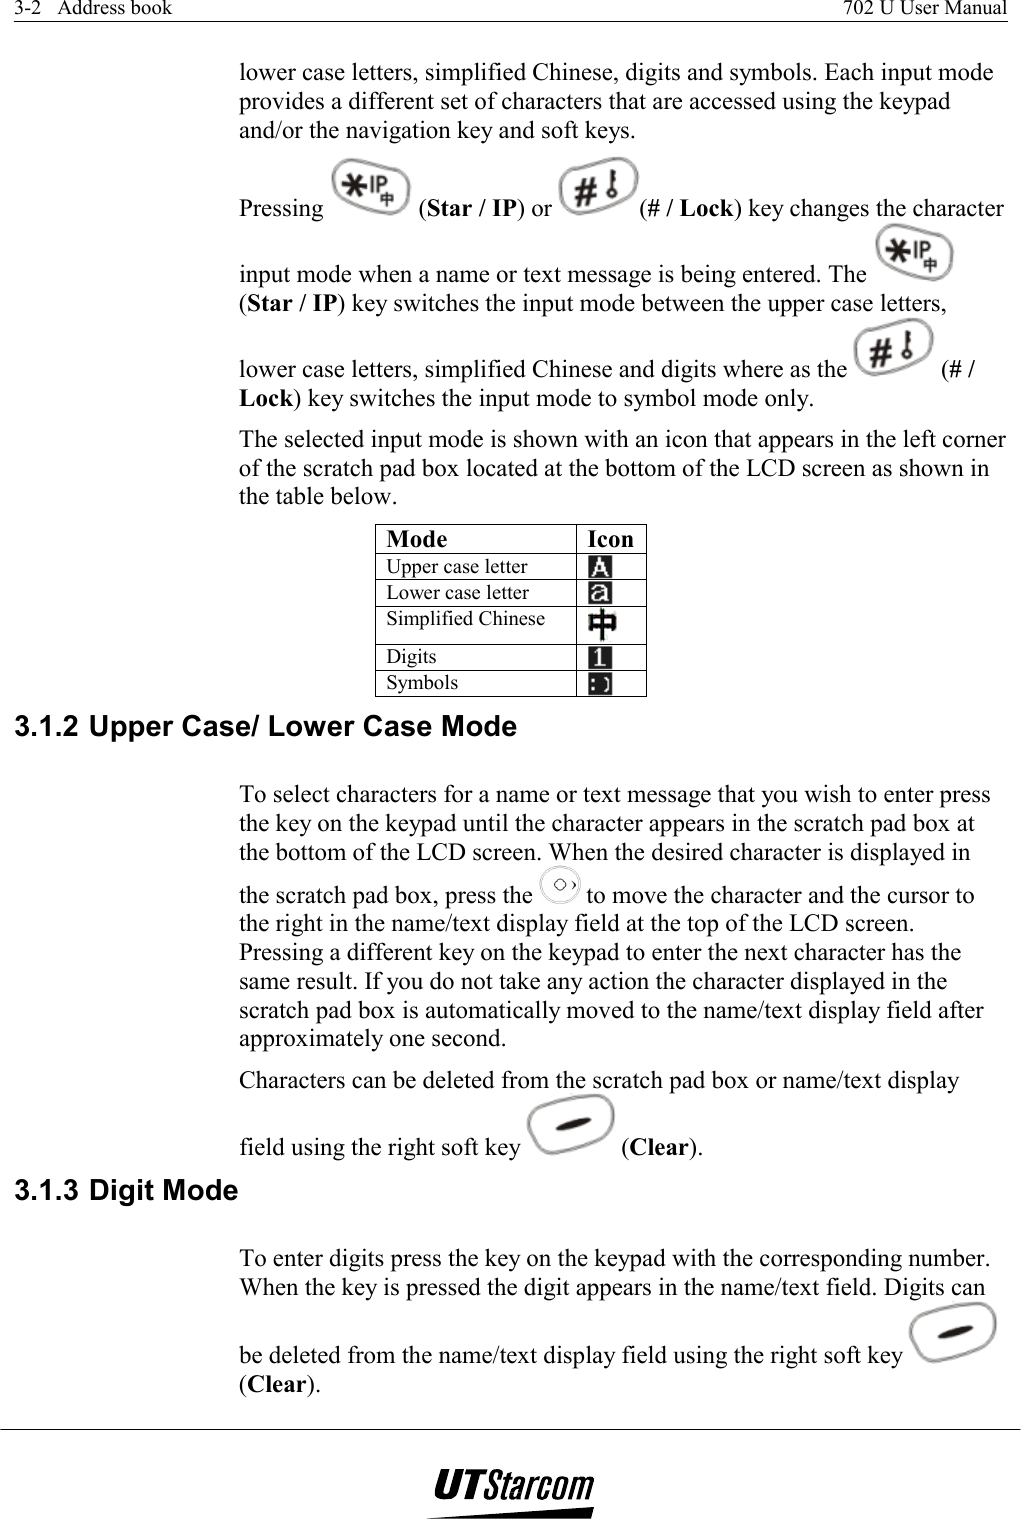 3-2   Address book    702 U User Manual   lower case letters, simplified Chinese, digits and symbols. Each input mode provides a different set of characters that are accessed using the keypad and/or the navigation key and soft keys. Pressing   (Star / IP) or  (# / Lock) key changes the character input mode when a name or text message is being entered. The   (Star / IP) key switches the input mode between the upper case letters, lower case letters, simplified Chinese and digits where as the   (# / Lock) key switches the input mode to symbol mode only. The selected input mode is shown with an icon that appears in the left corner of the scratch pad box located at the bottom of the LCD screen as shown in the table below. Mode IconUpper case letter   Lower case letter   Simplified Chinese   Digits   Symbols   3.1.2 Upper Case/ Lower Case Mode To select characters for a name or text message that you wish to enter press the key on the keypad until the character appears in the scratch pad box at the bottom of the LCD screen. When the desired character is displayed in the scratch pad box, press the   to move the character and the cursor to the right in the name/text display field at the top of the LCD screen. Pressing a different key on the keypad to enter the next character has the same result. If you do not take any action the character displayed in the scratch pad box is automatically moved to the name/text display field after approximately one second.  Characters can be deleted from the scratch pad box or name/text display field using the right soft key   (Clear).  3.1.3 Digit Mode To enter digits press the key on the keypad with the corresponding number. When the key is pressed the digit appears in the name/text field. Digits can be deleted from the name/text display field using the right soft key   (Clear). 